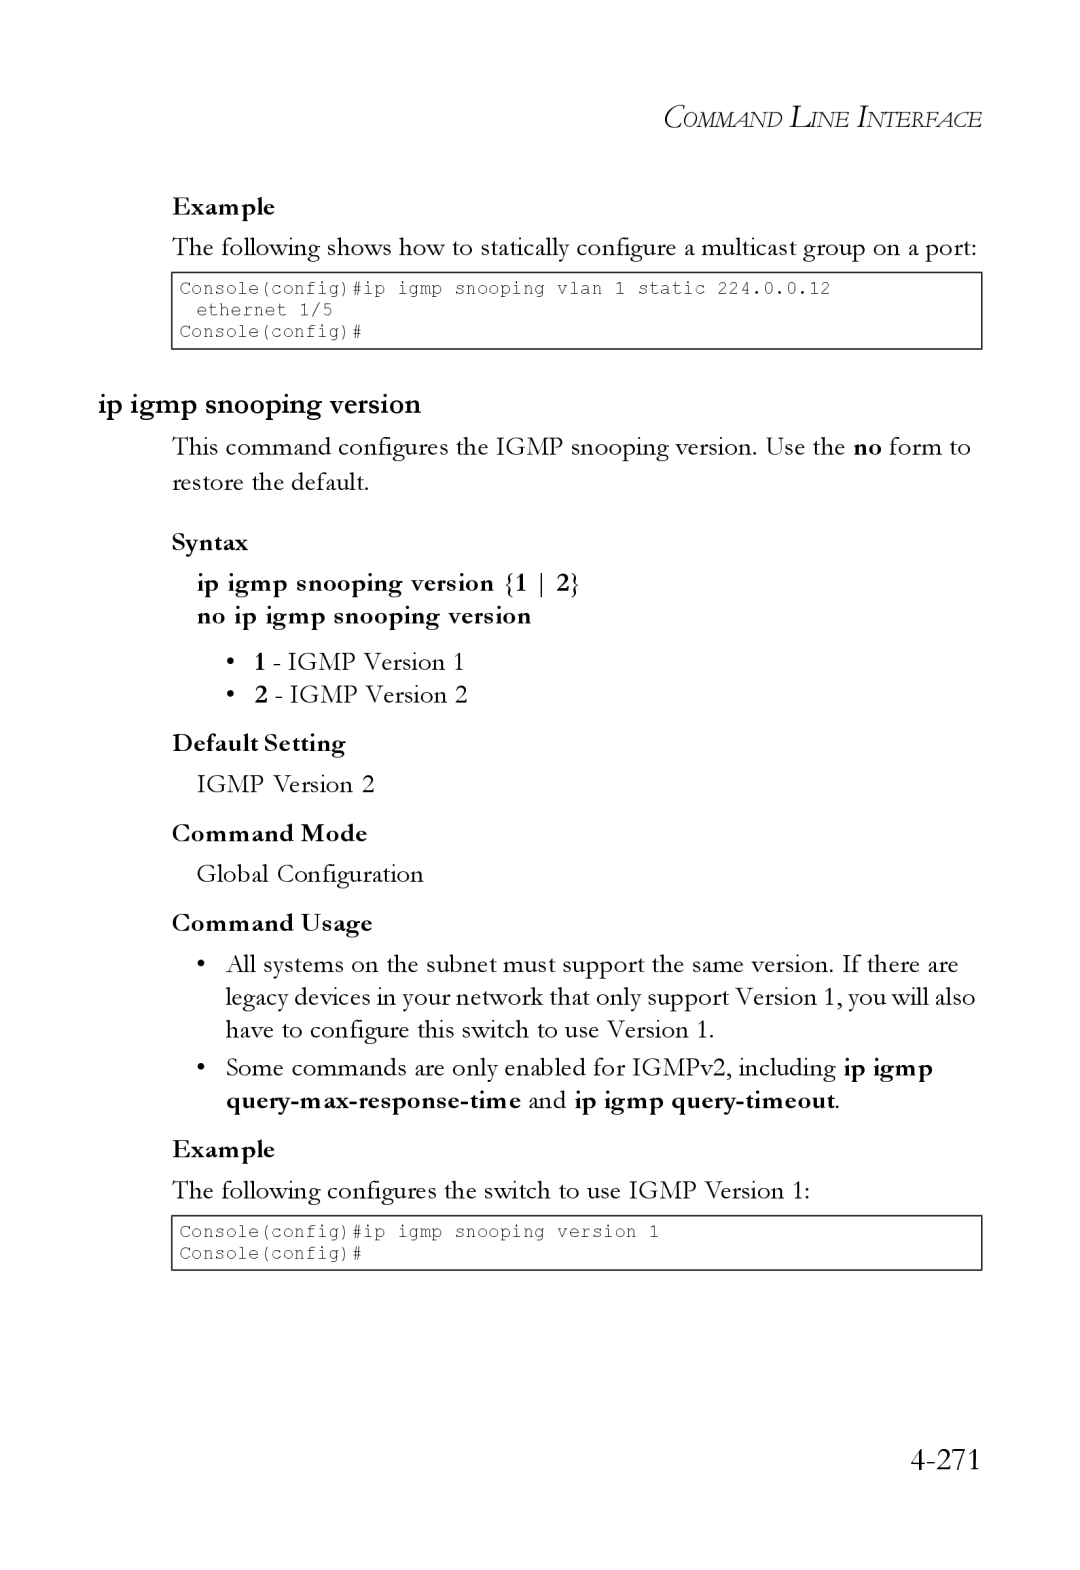 SMC Networks SMC6824M manual 271, Ip igmp snooping version, Following configures the switch to use Igmp Version 